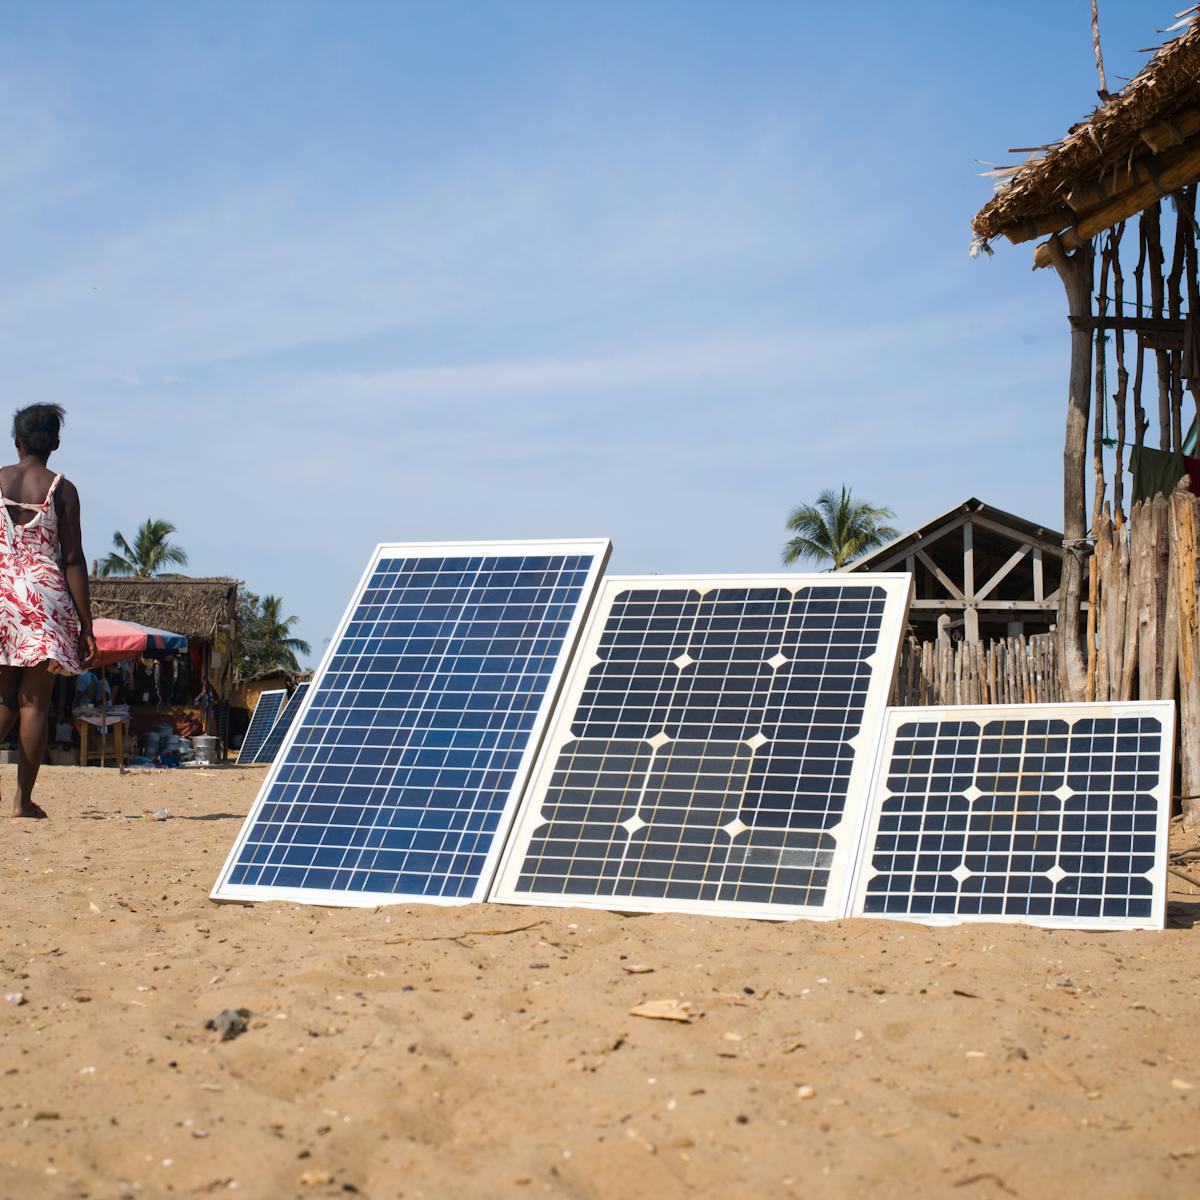 Extranjero Gobernable Novio Expanded access to solar power in Africa can stimulate economic development  – but there are risks